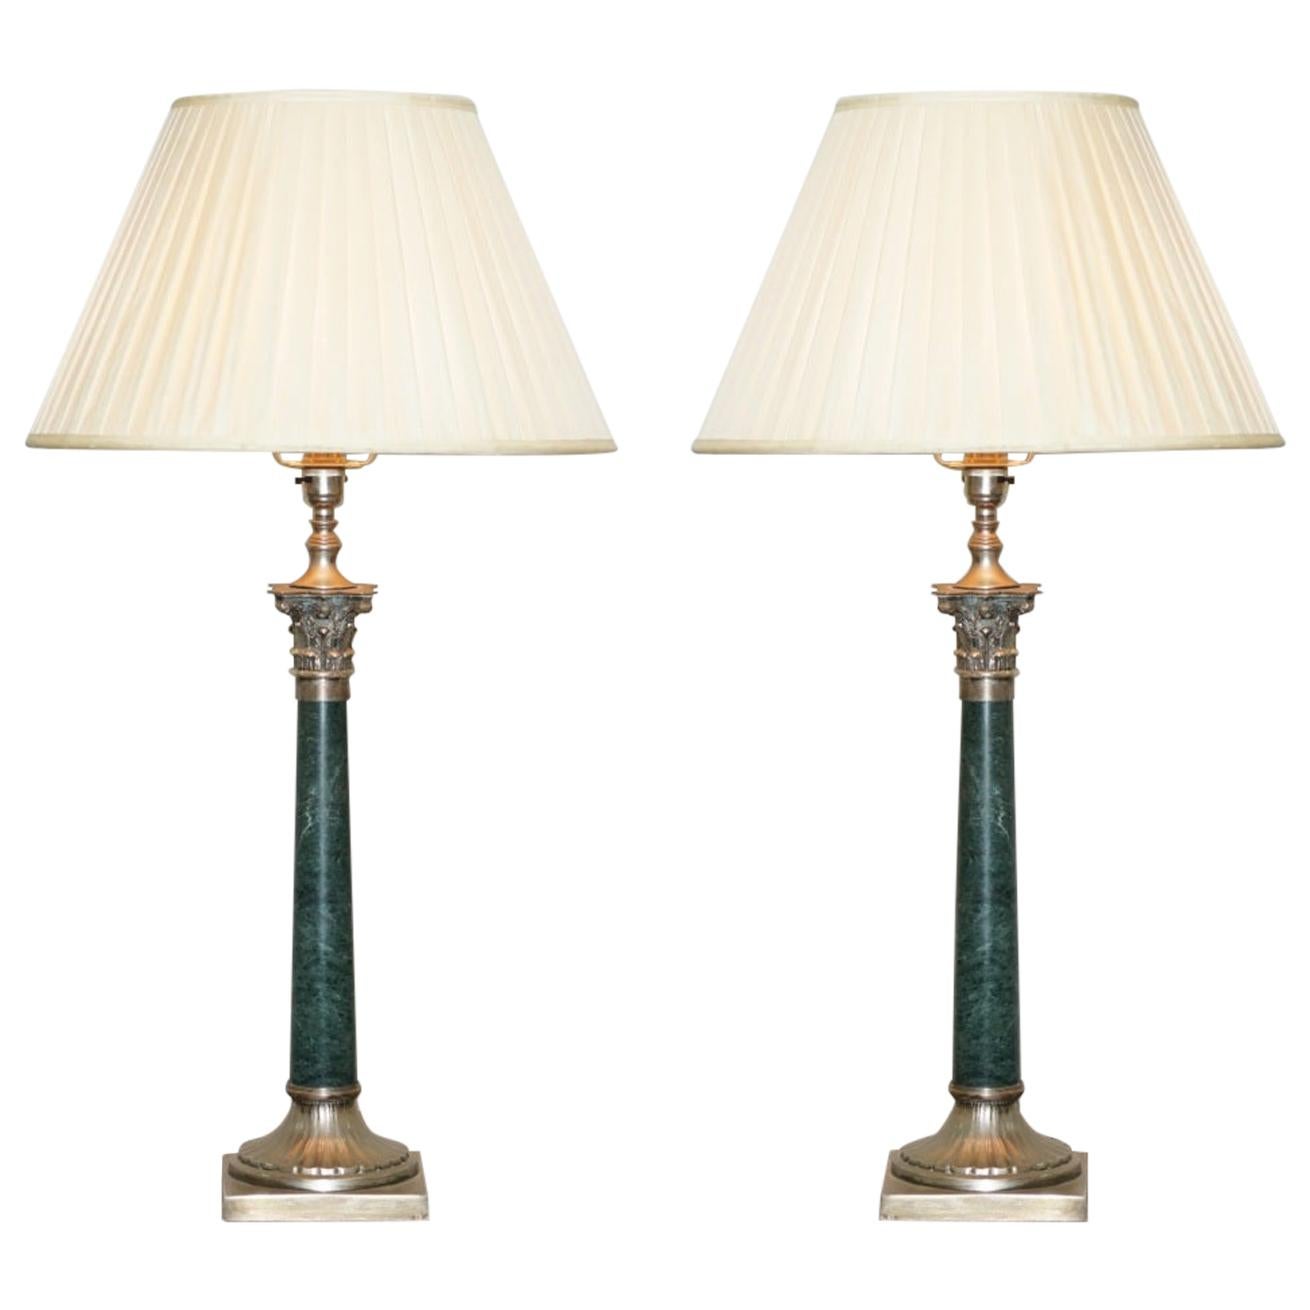 Pair of Vintage Green Marble Silver Plated Large Corinthian Pillared Table Lamps